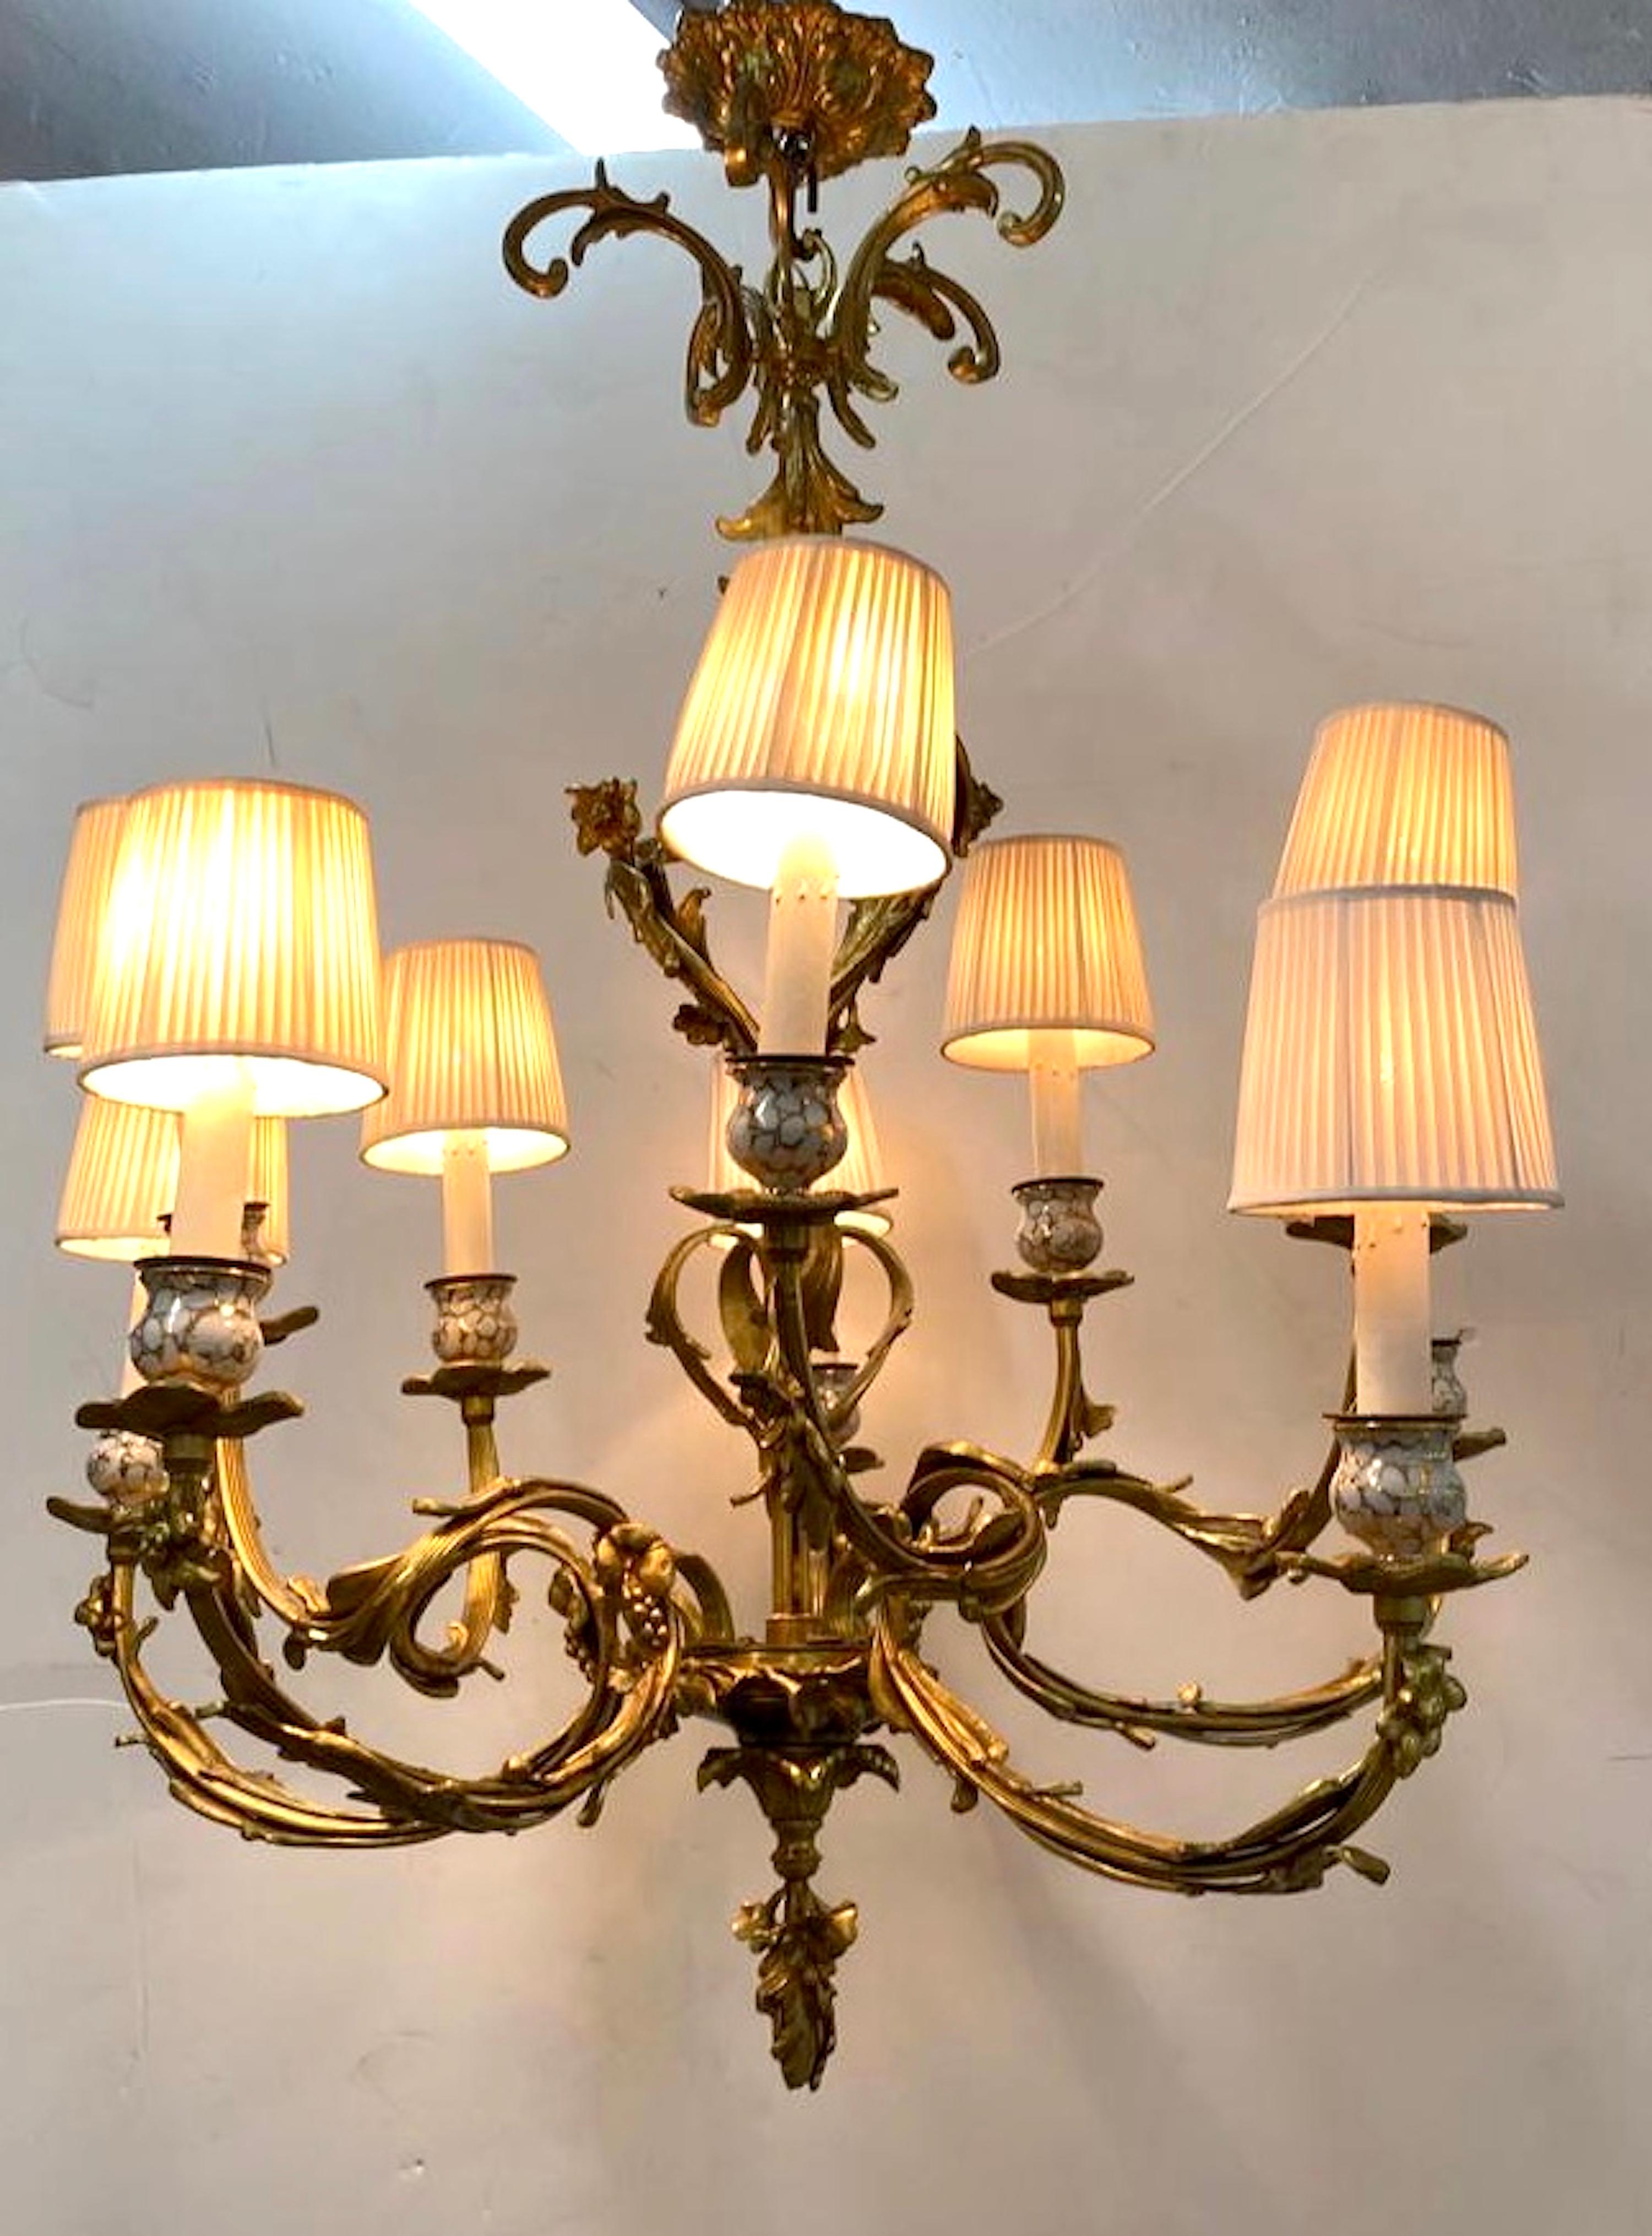 A very nice French dore' bronze chandelier in the Rococo style with ten lights. There are five sets of double arms. Each set has a higher and a lower arm ending with a dore' bronze bobeche and porcelain candle/socket holder. The chandelier features